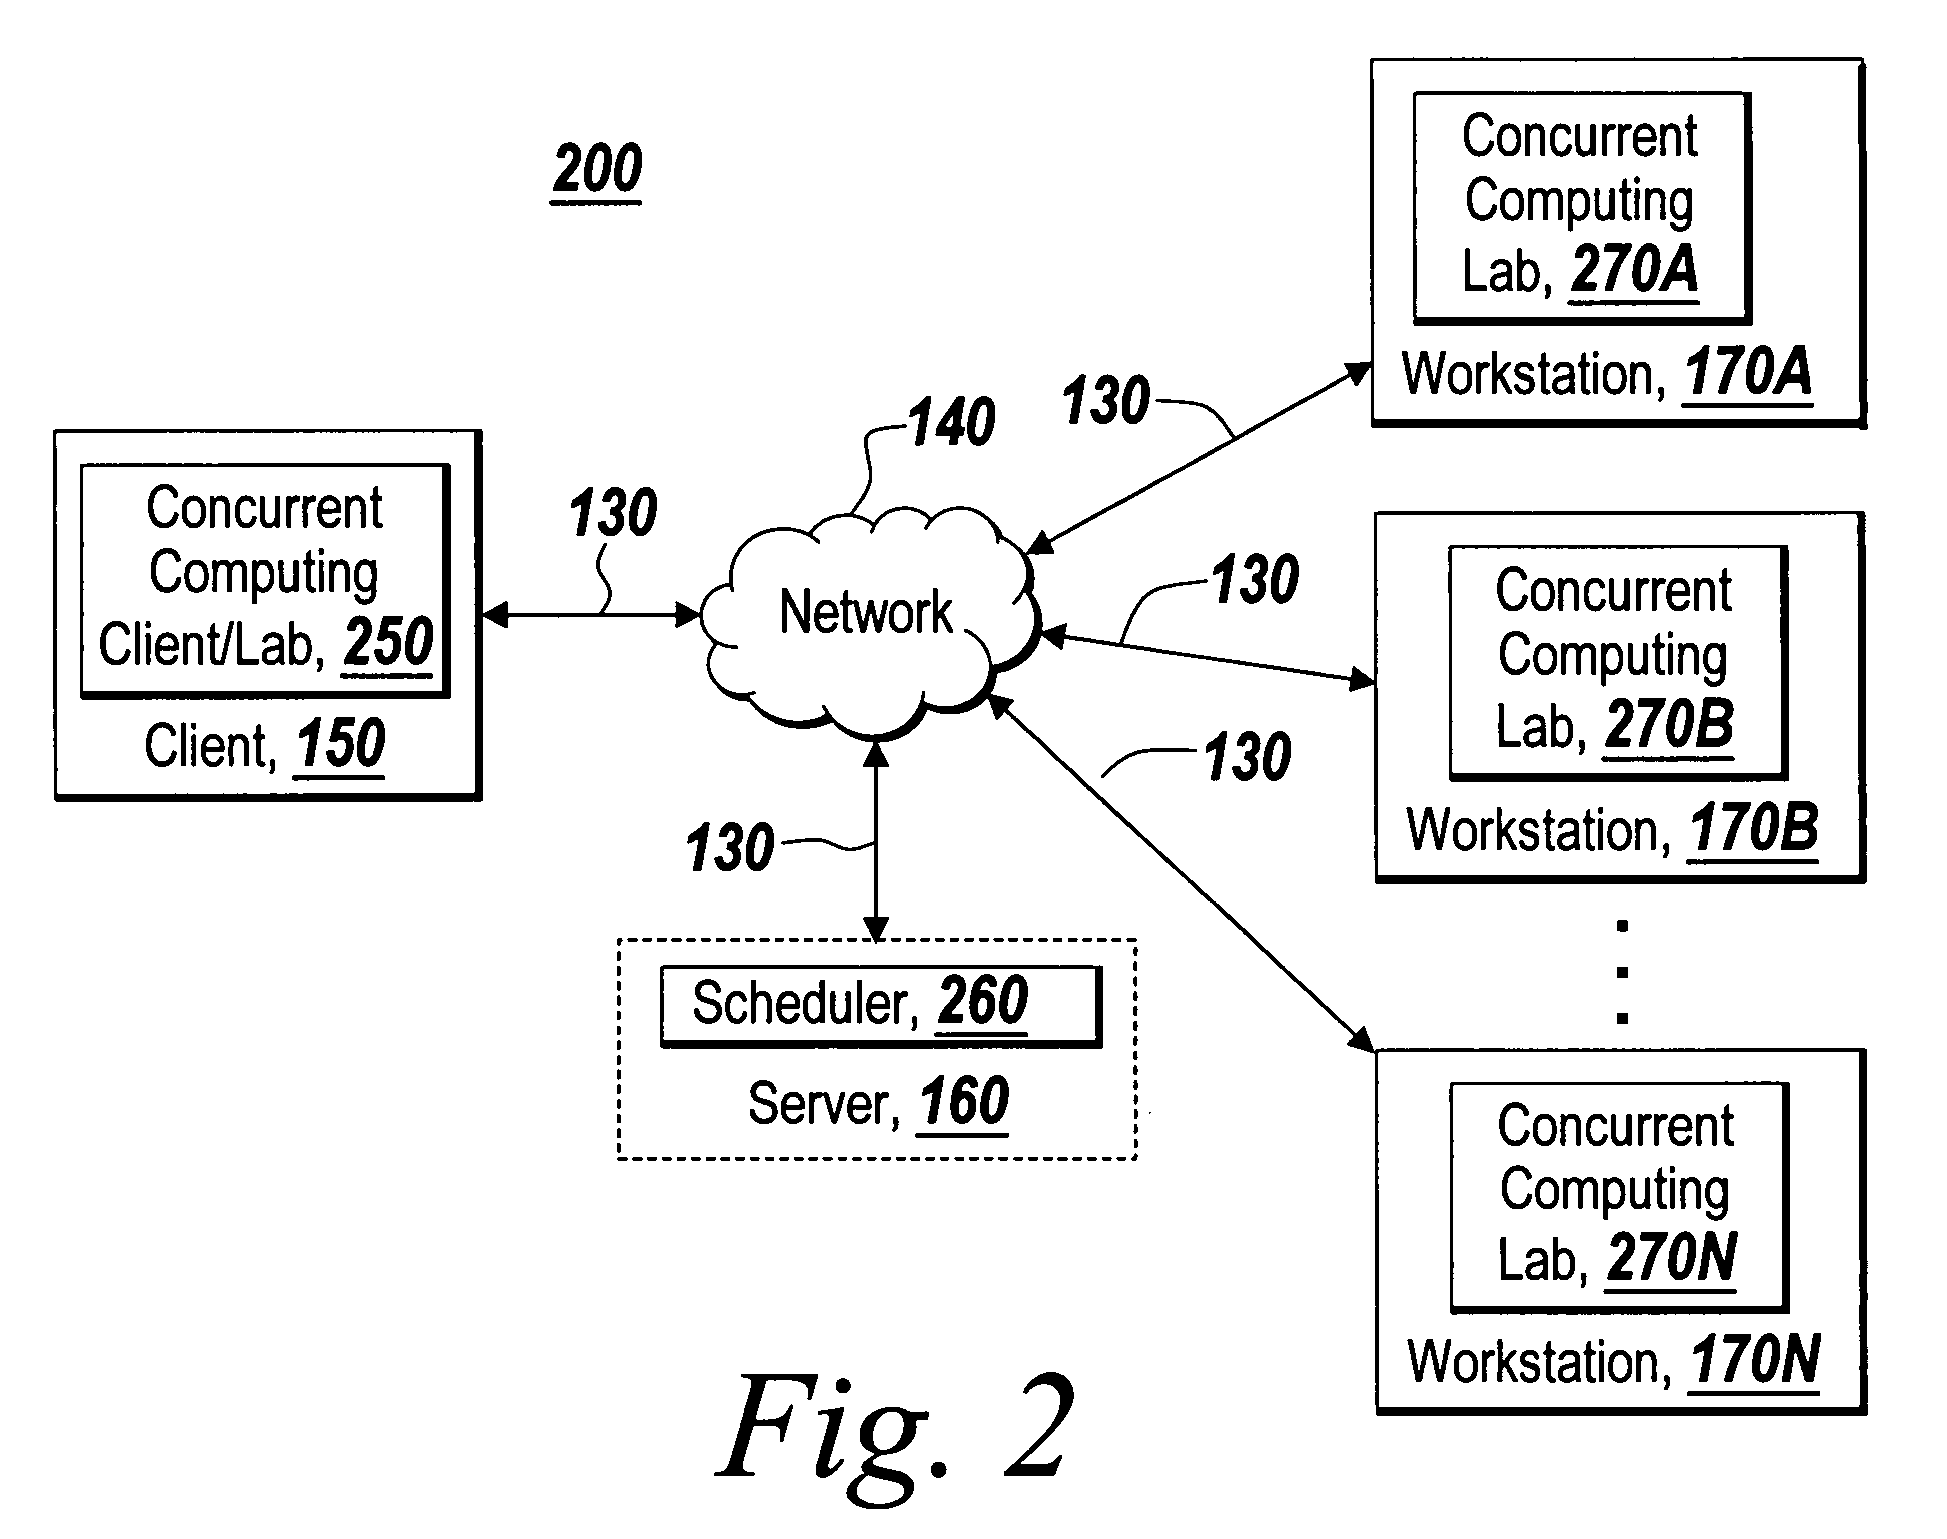 Recoverable error detection for concurrent computing programs